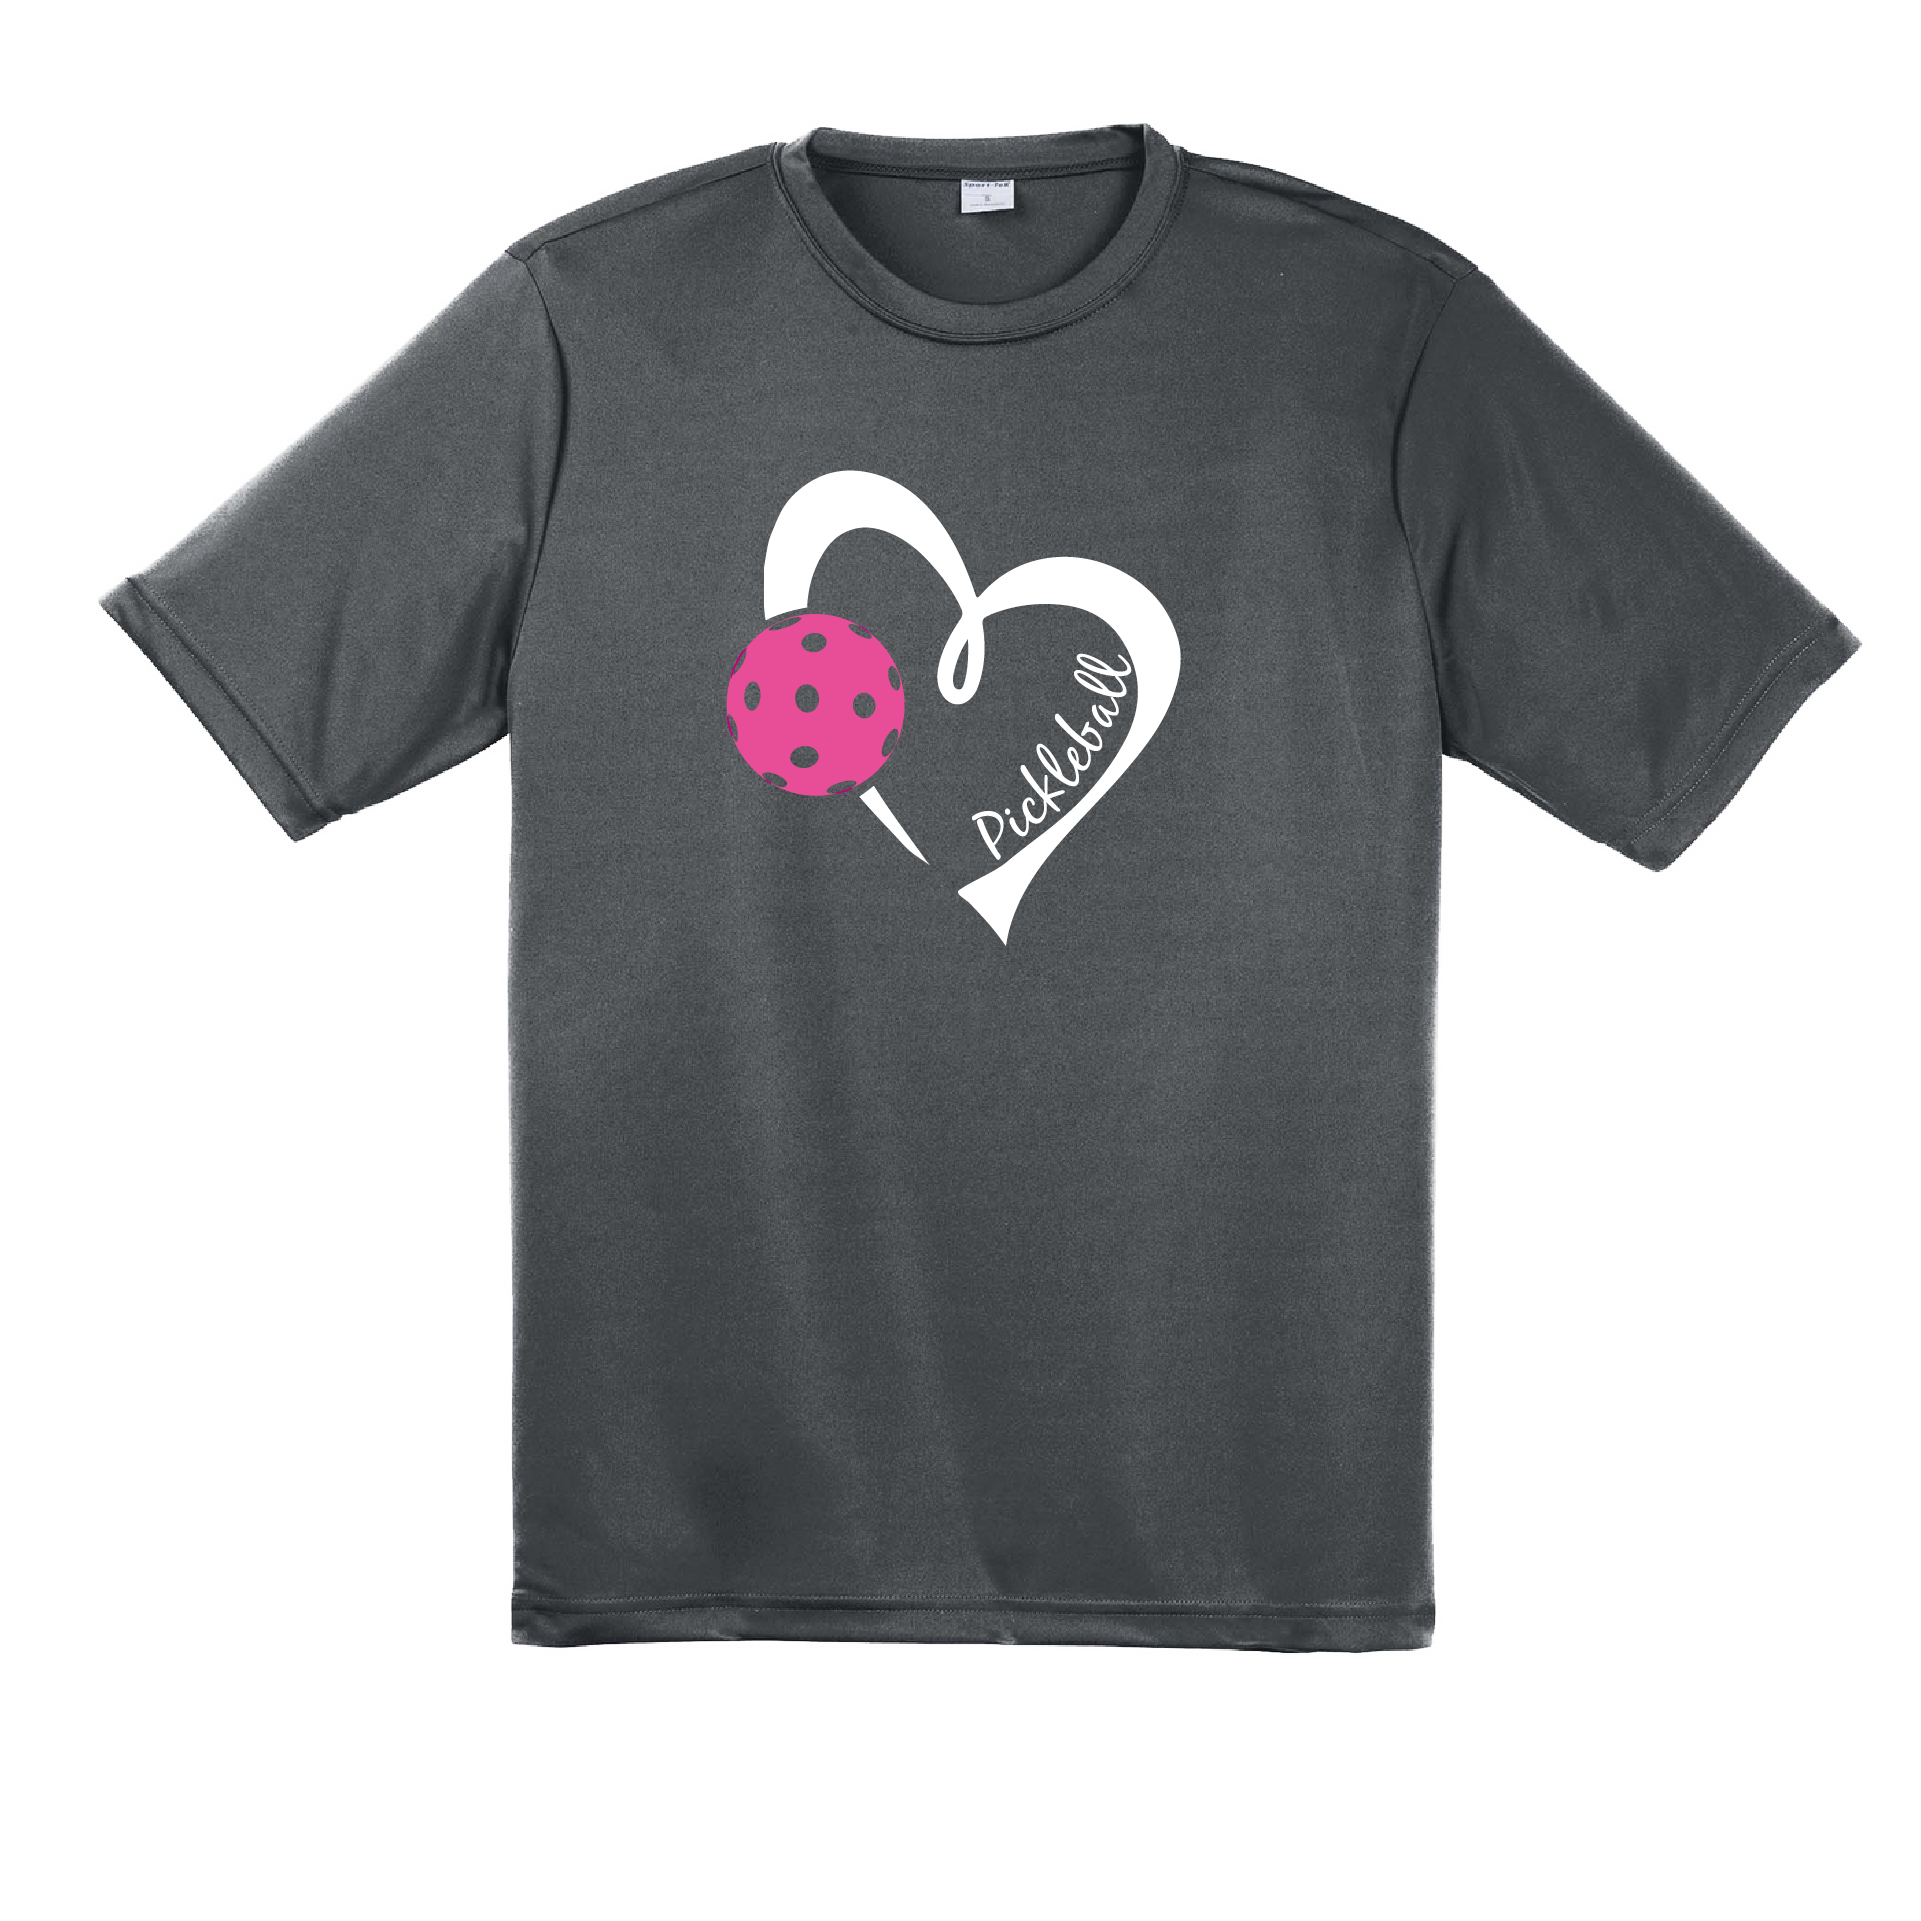 Pickleball Design: Heart with Pickleball  Men's Style: Short Sleeve  Shirts are lightweight, roomy and highly breathable. These moisture-wicking shirts are designed for athletic performance. They feature PosiCharge technology to lock in color and prevent logos from fading. Removable tag and set-in sleeves for comfort.